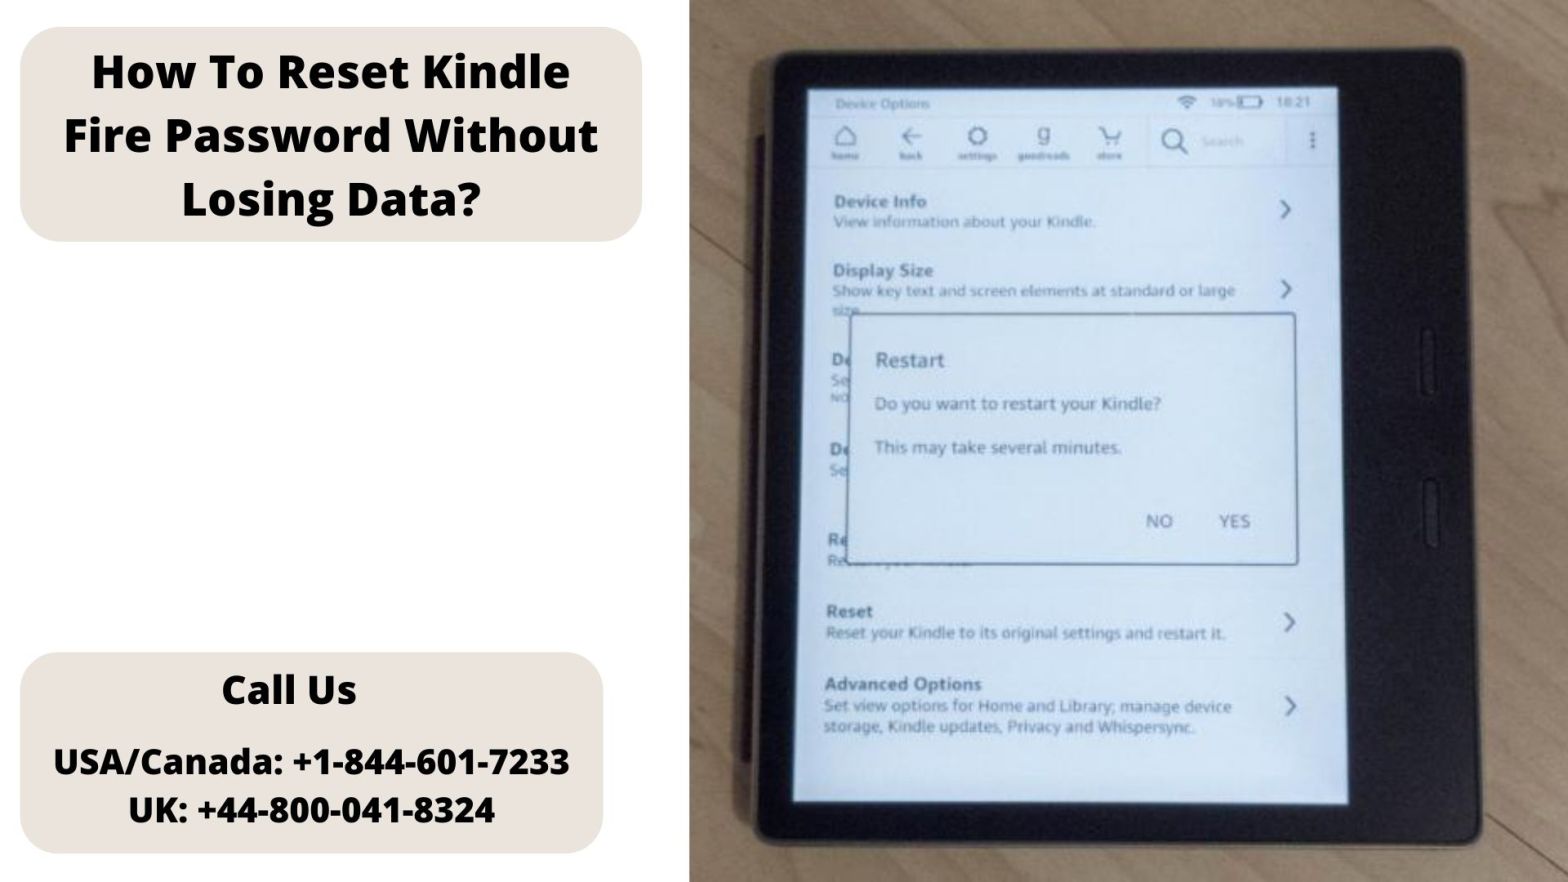 How To Reset Kindle Fire Password Without Losing Data? – Kindle